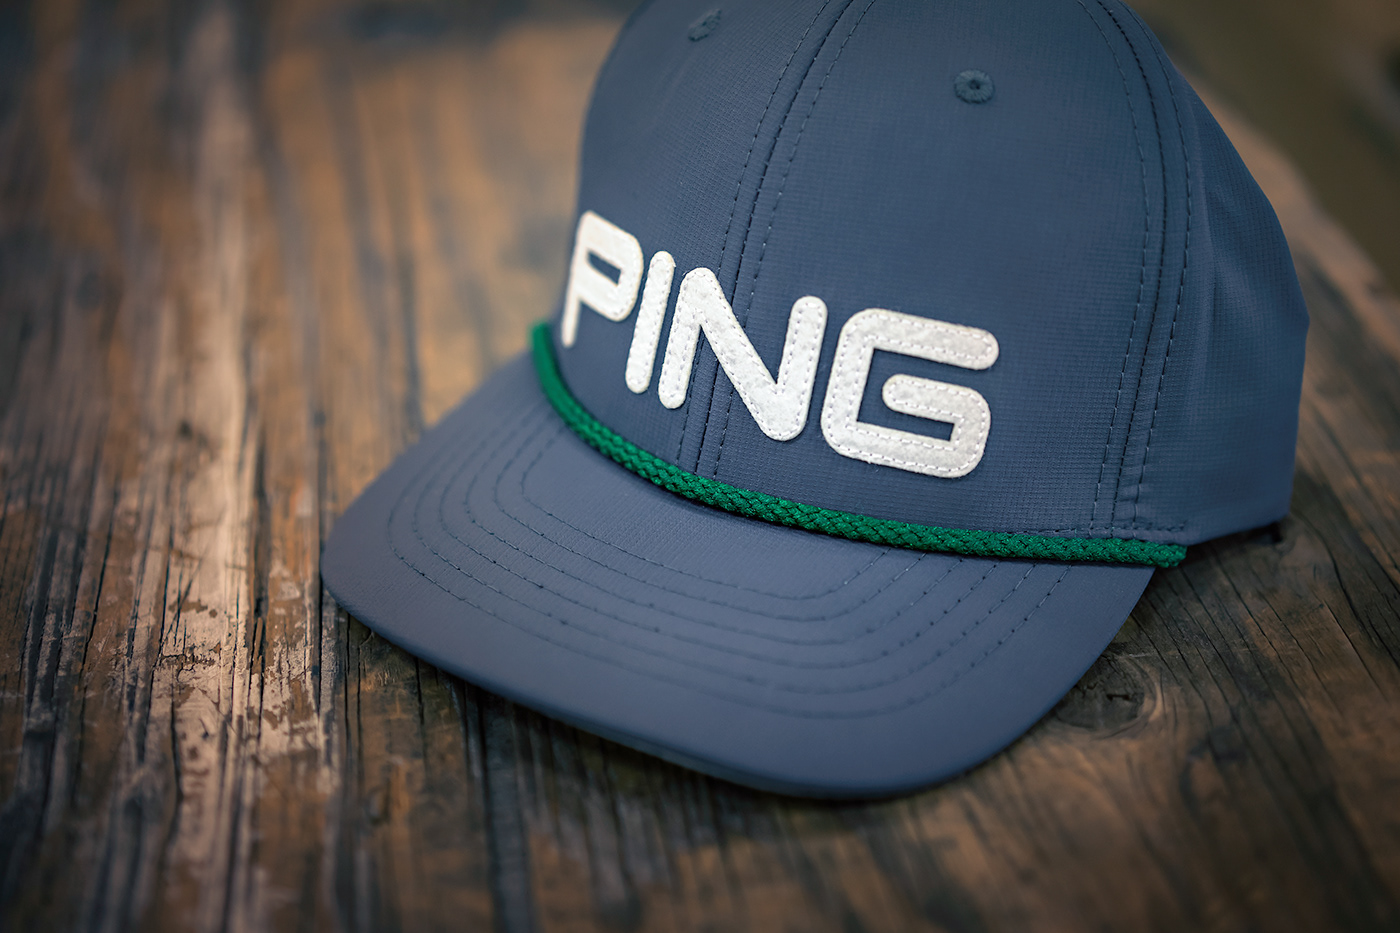 PING Limited-Edition Product Photography on Behance